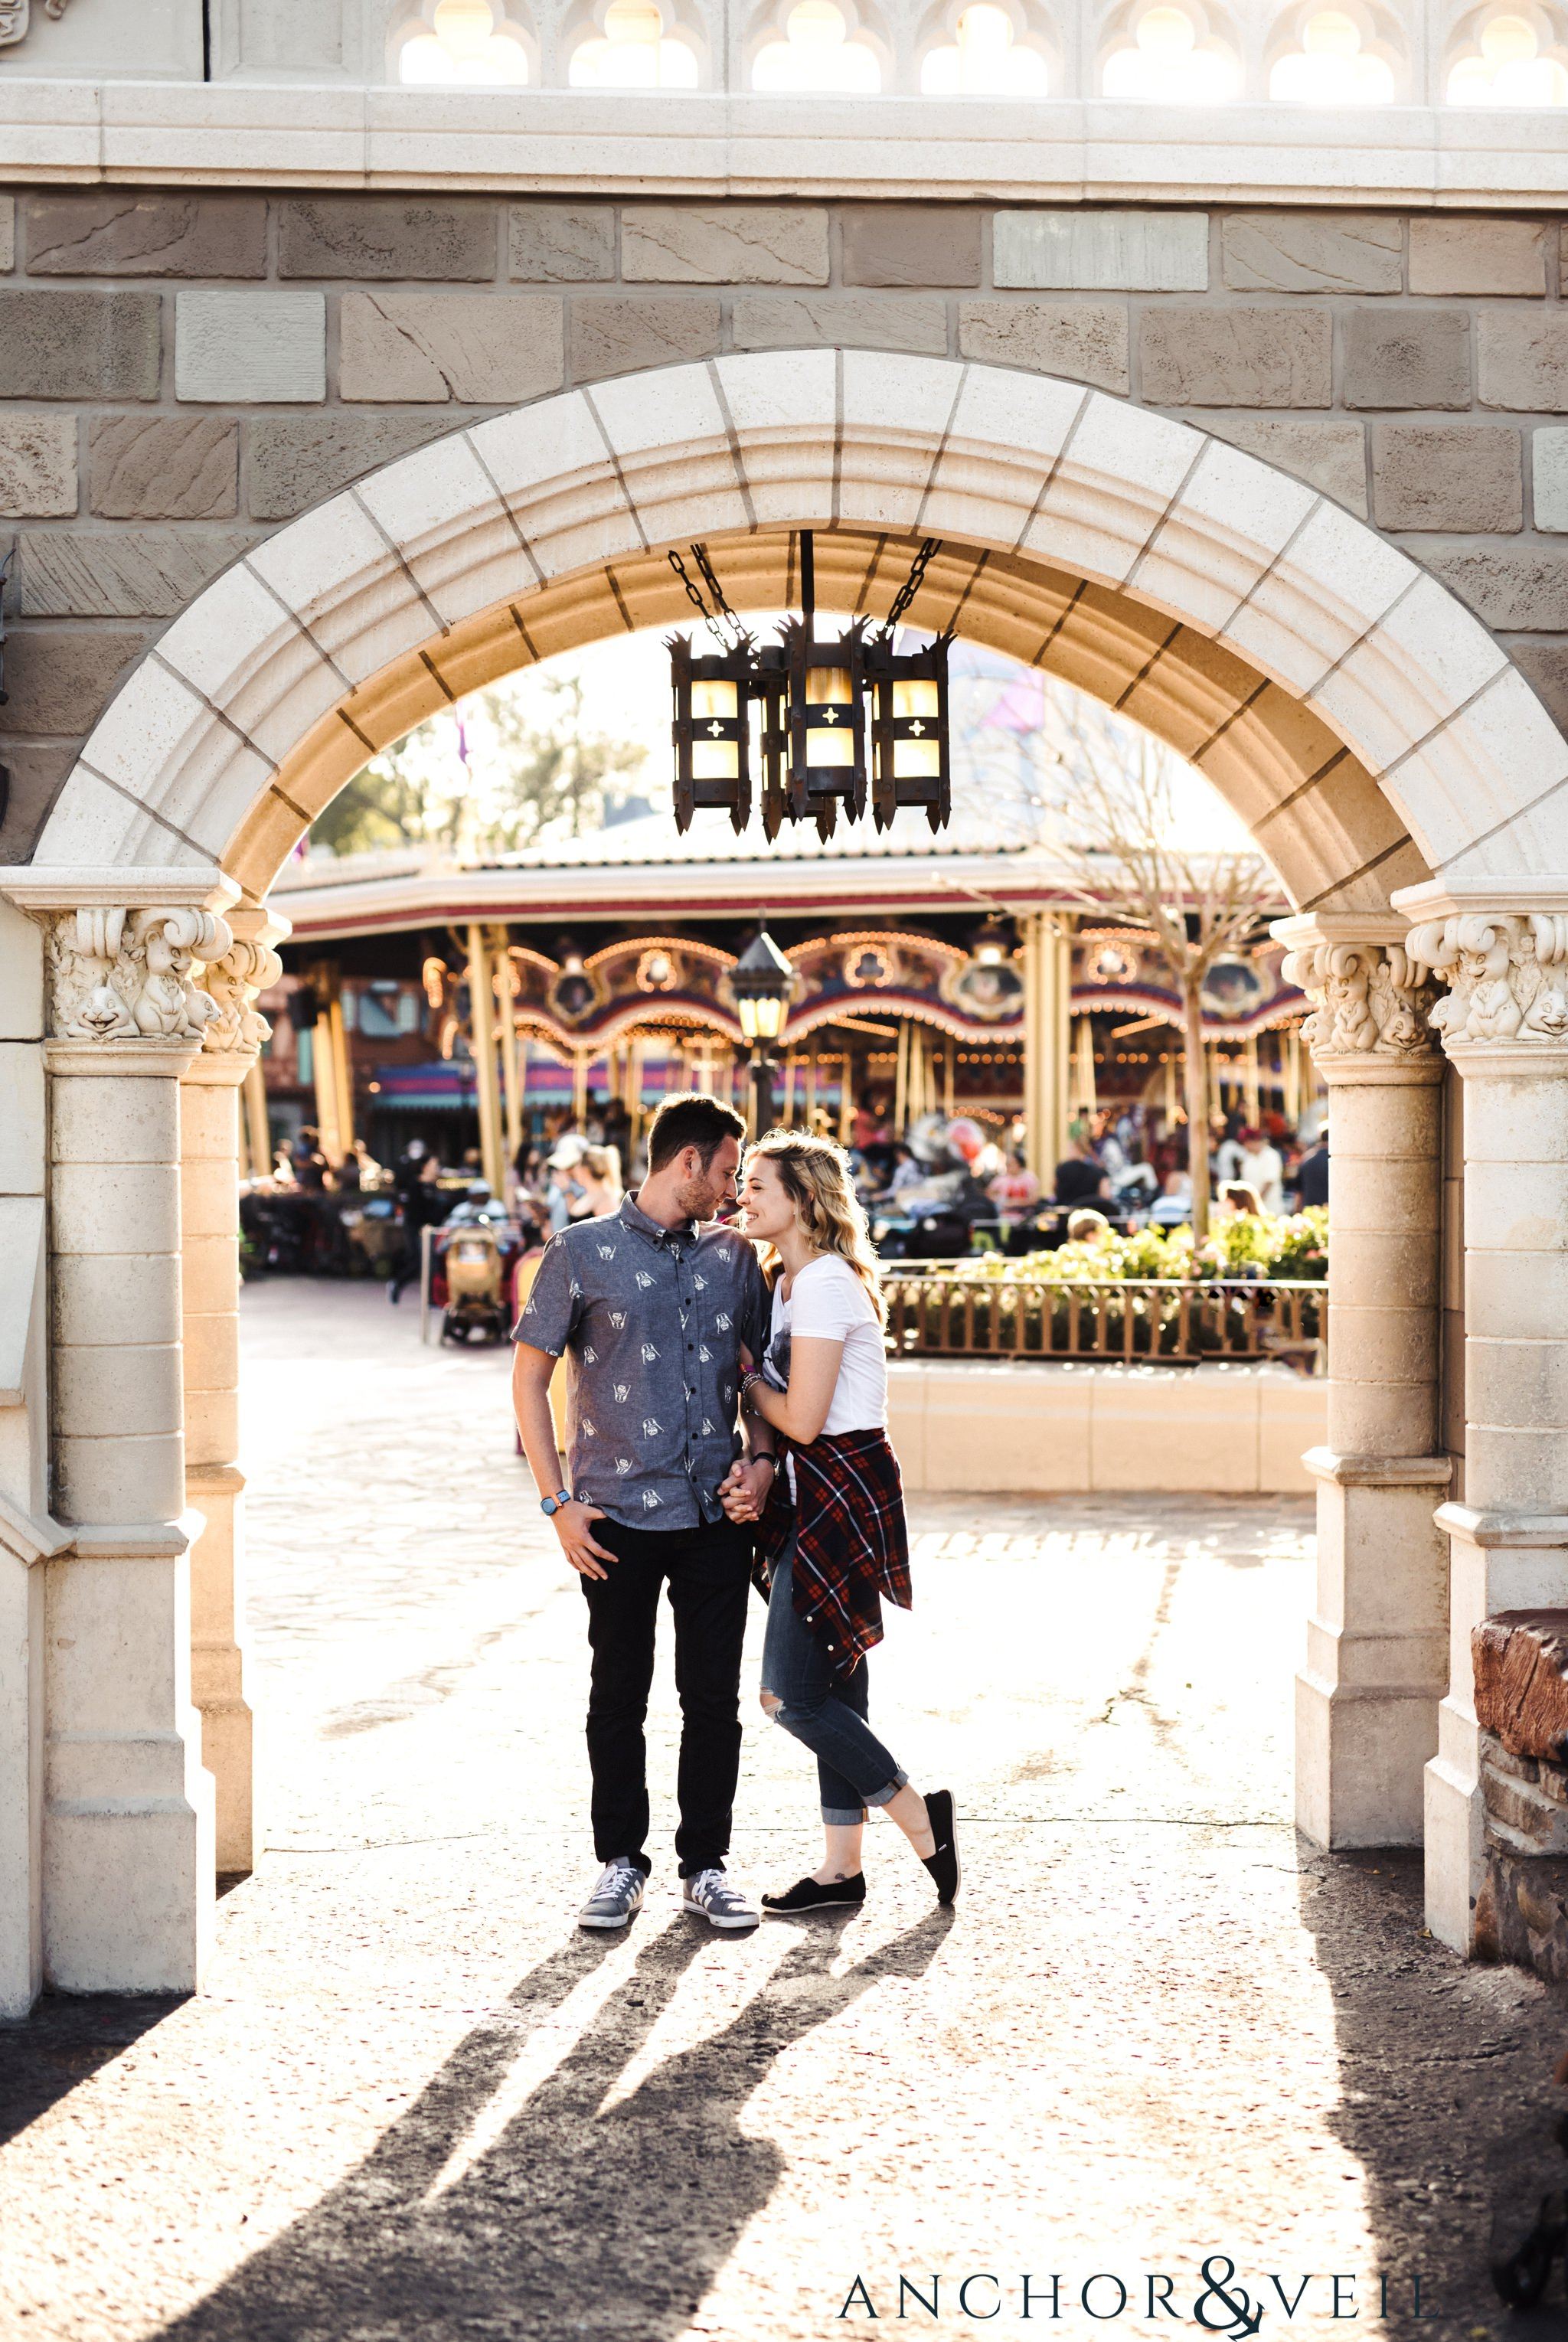 under the arches looking at each other during their Disney world engagement session at Disney's Magic Kingdom